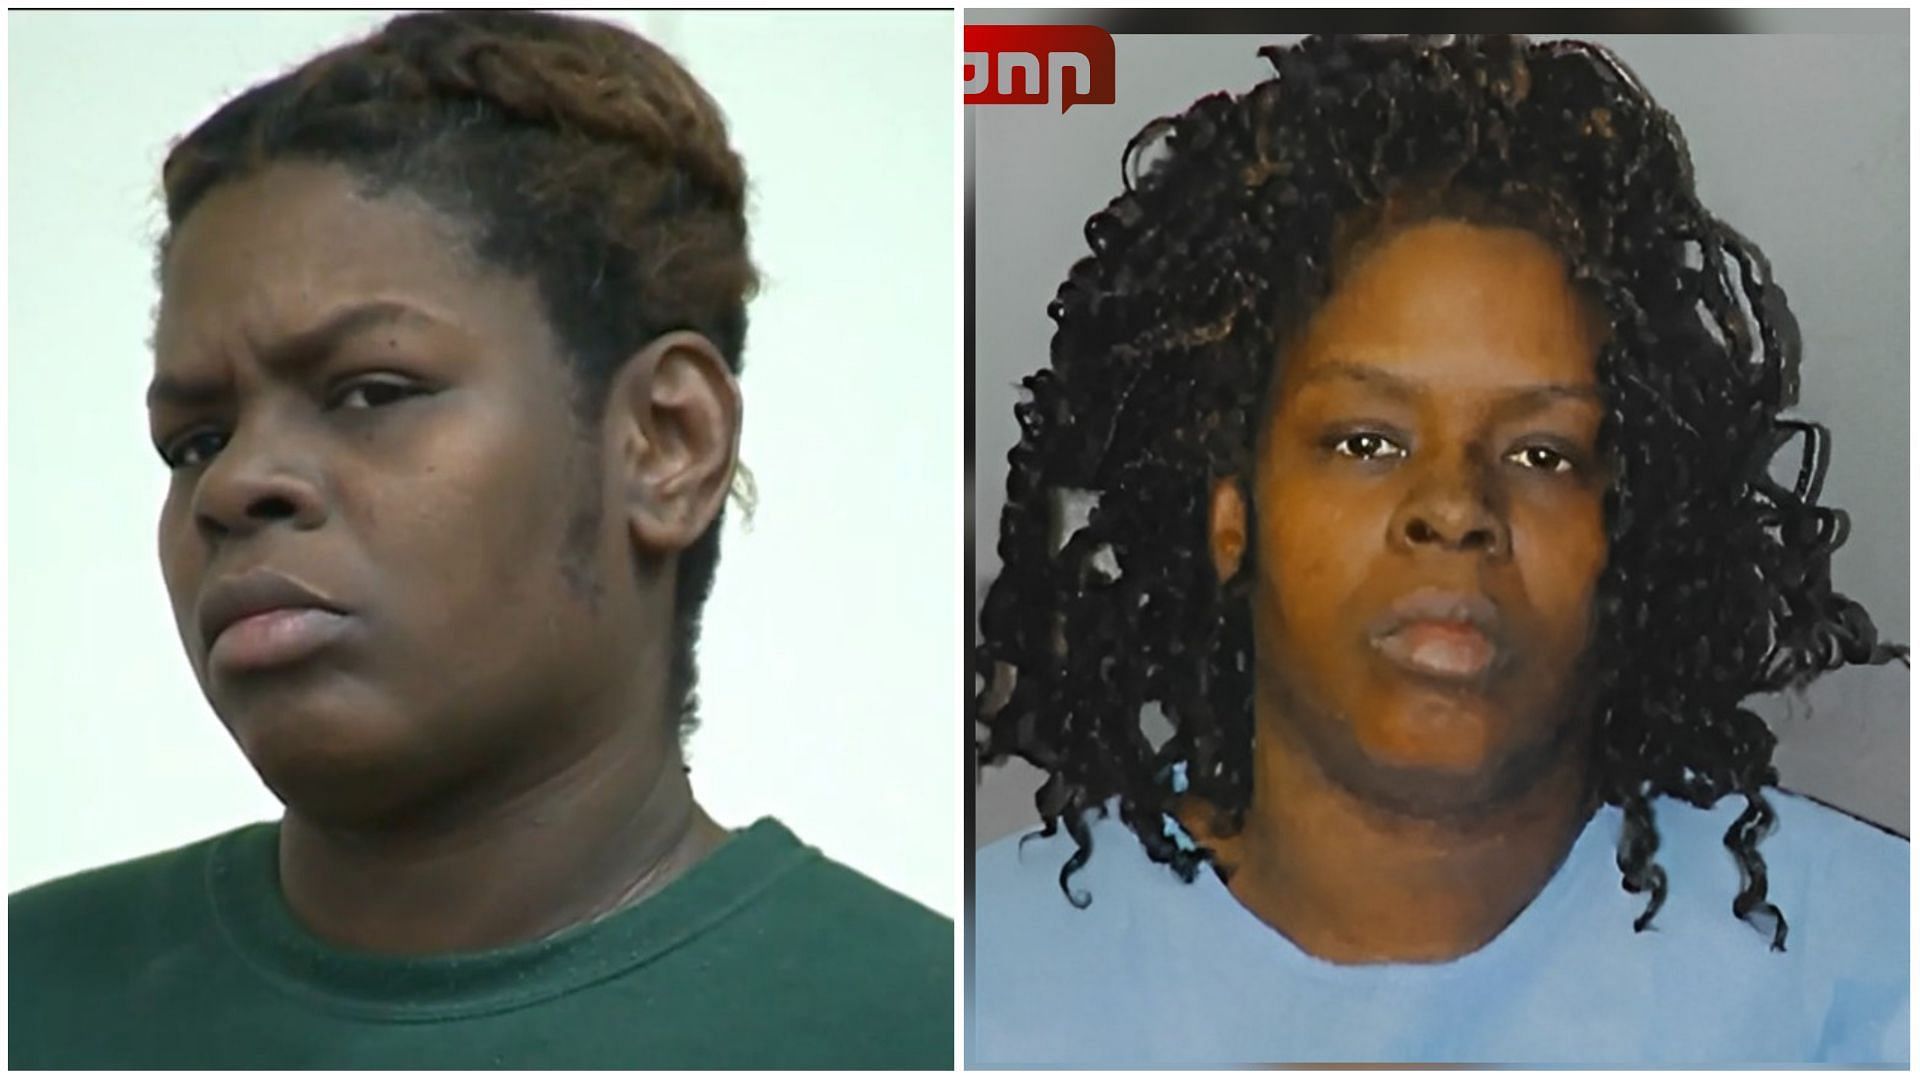 Brockton mother is convicted of the 2018 murders of her young sons and sentenced to life in prison (Images via Twitter @/gchahal @/DarrenBotelho)